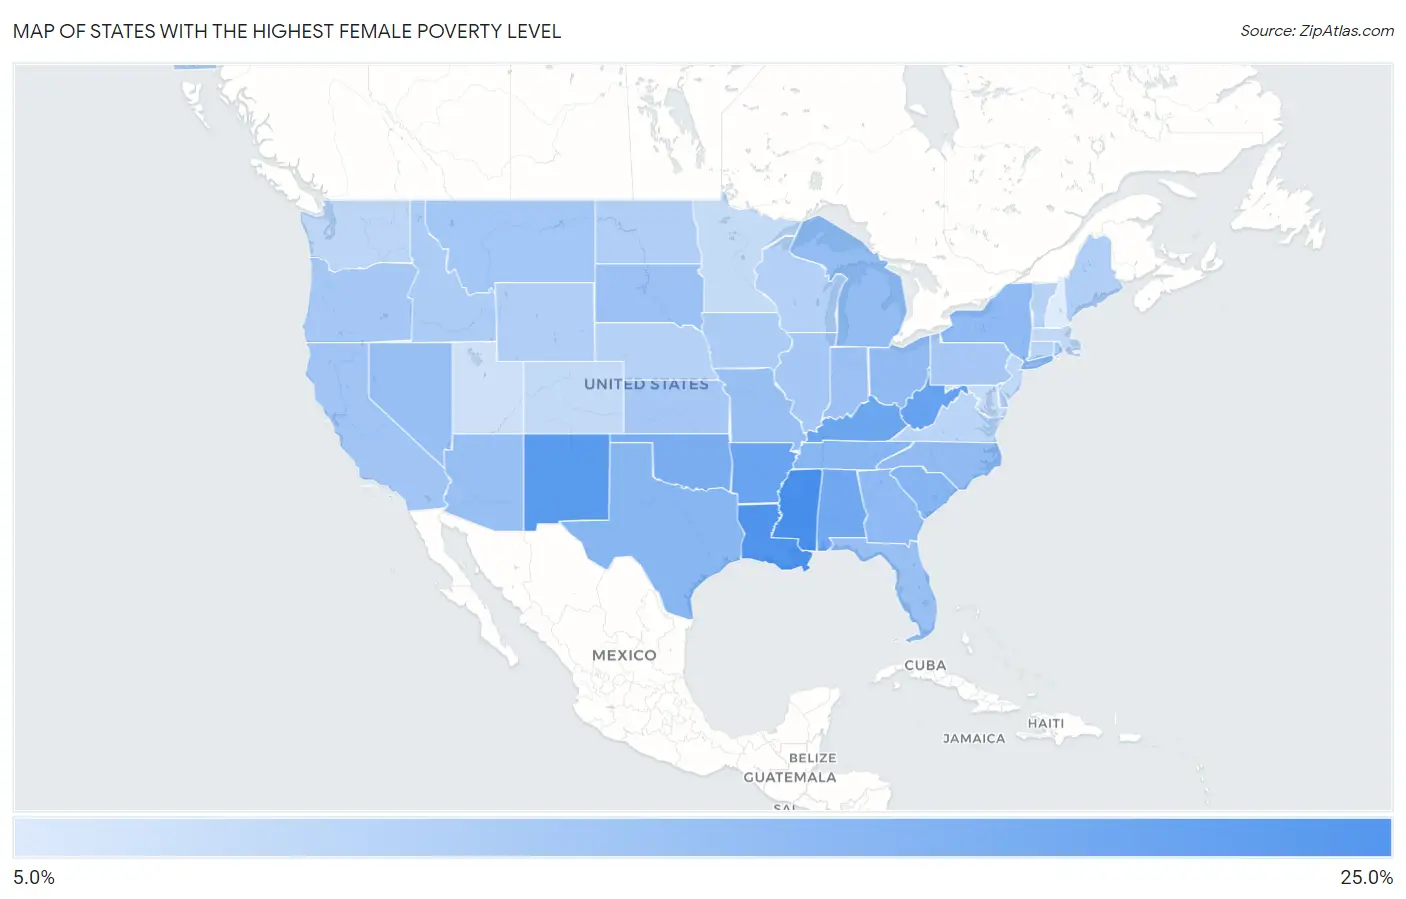 States with the Highest Female Poverty Level in the United States Map